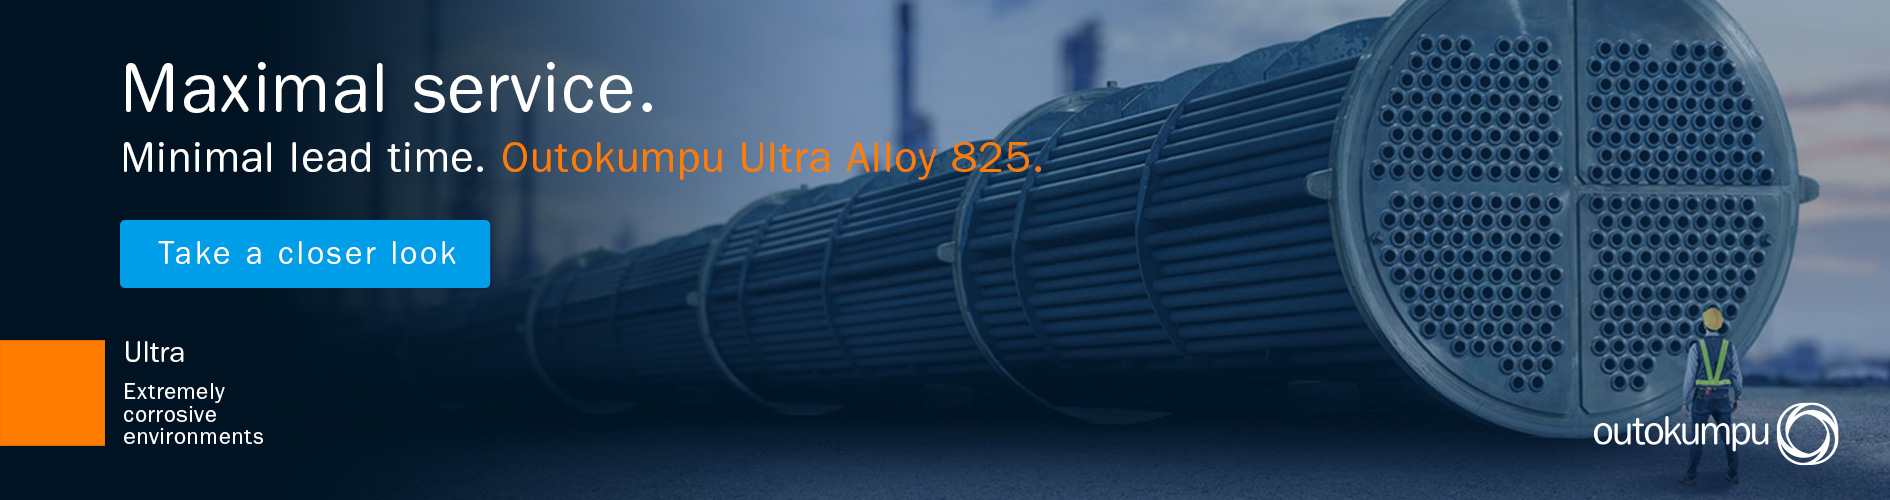 Ultra Alloy 825 campaign banner